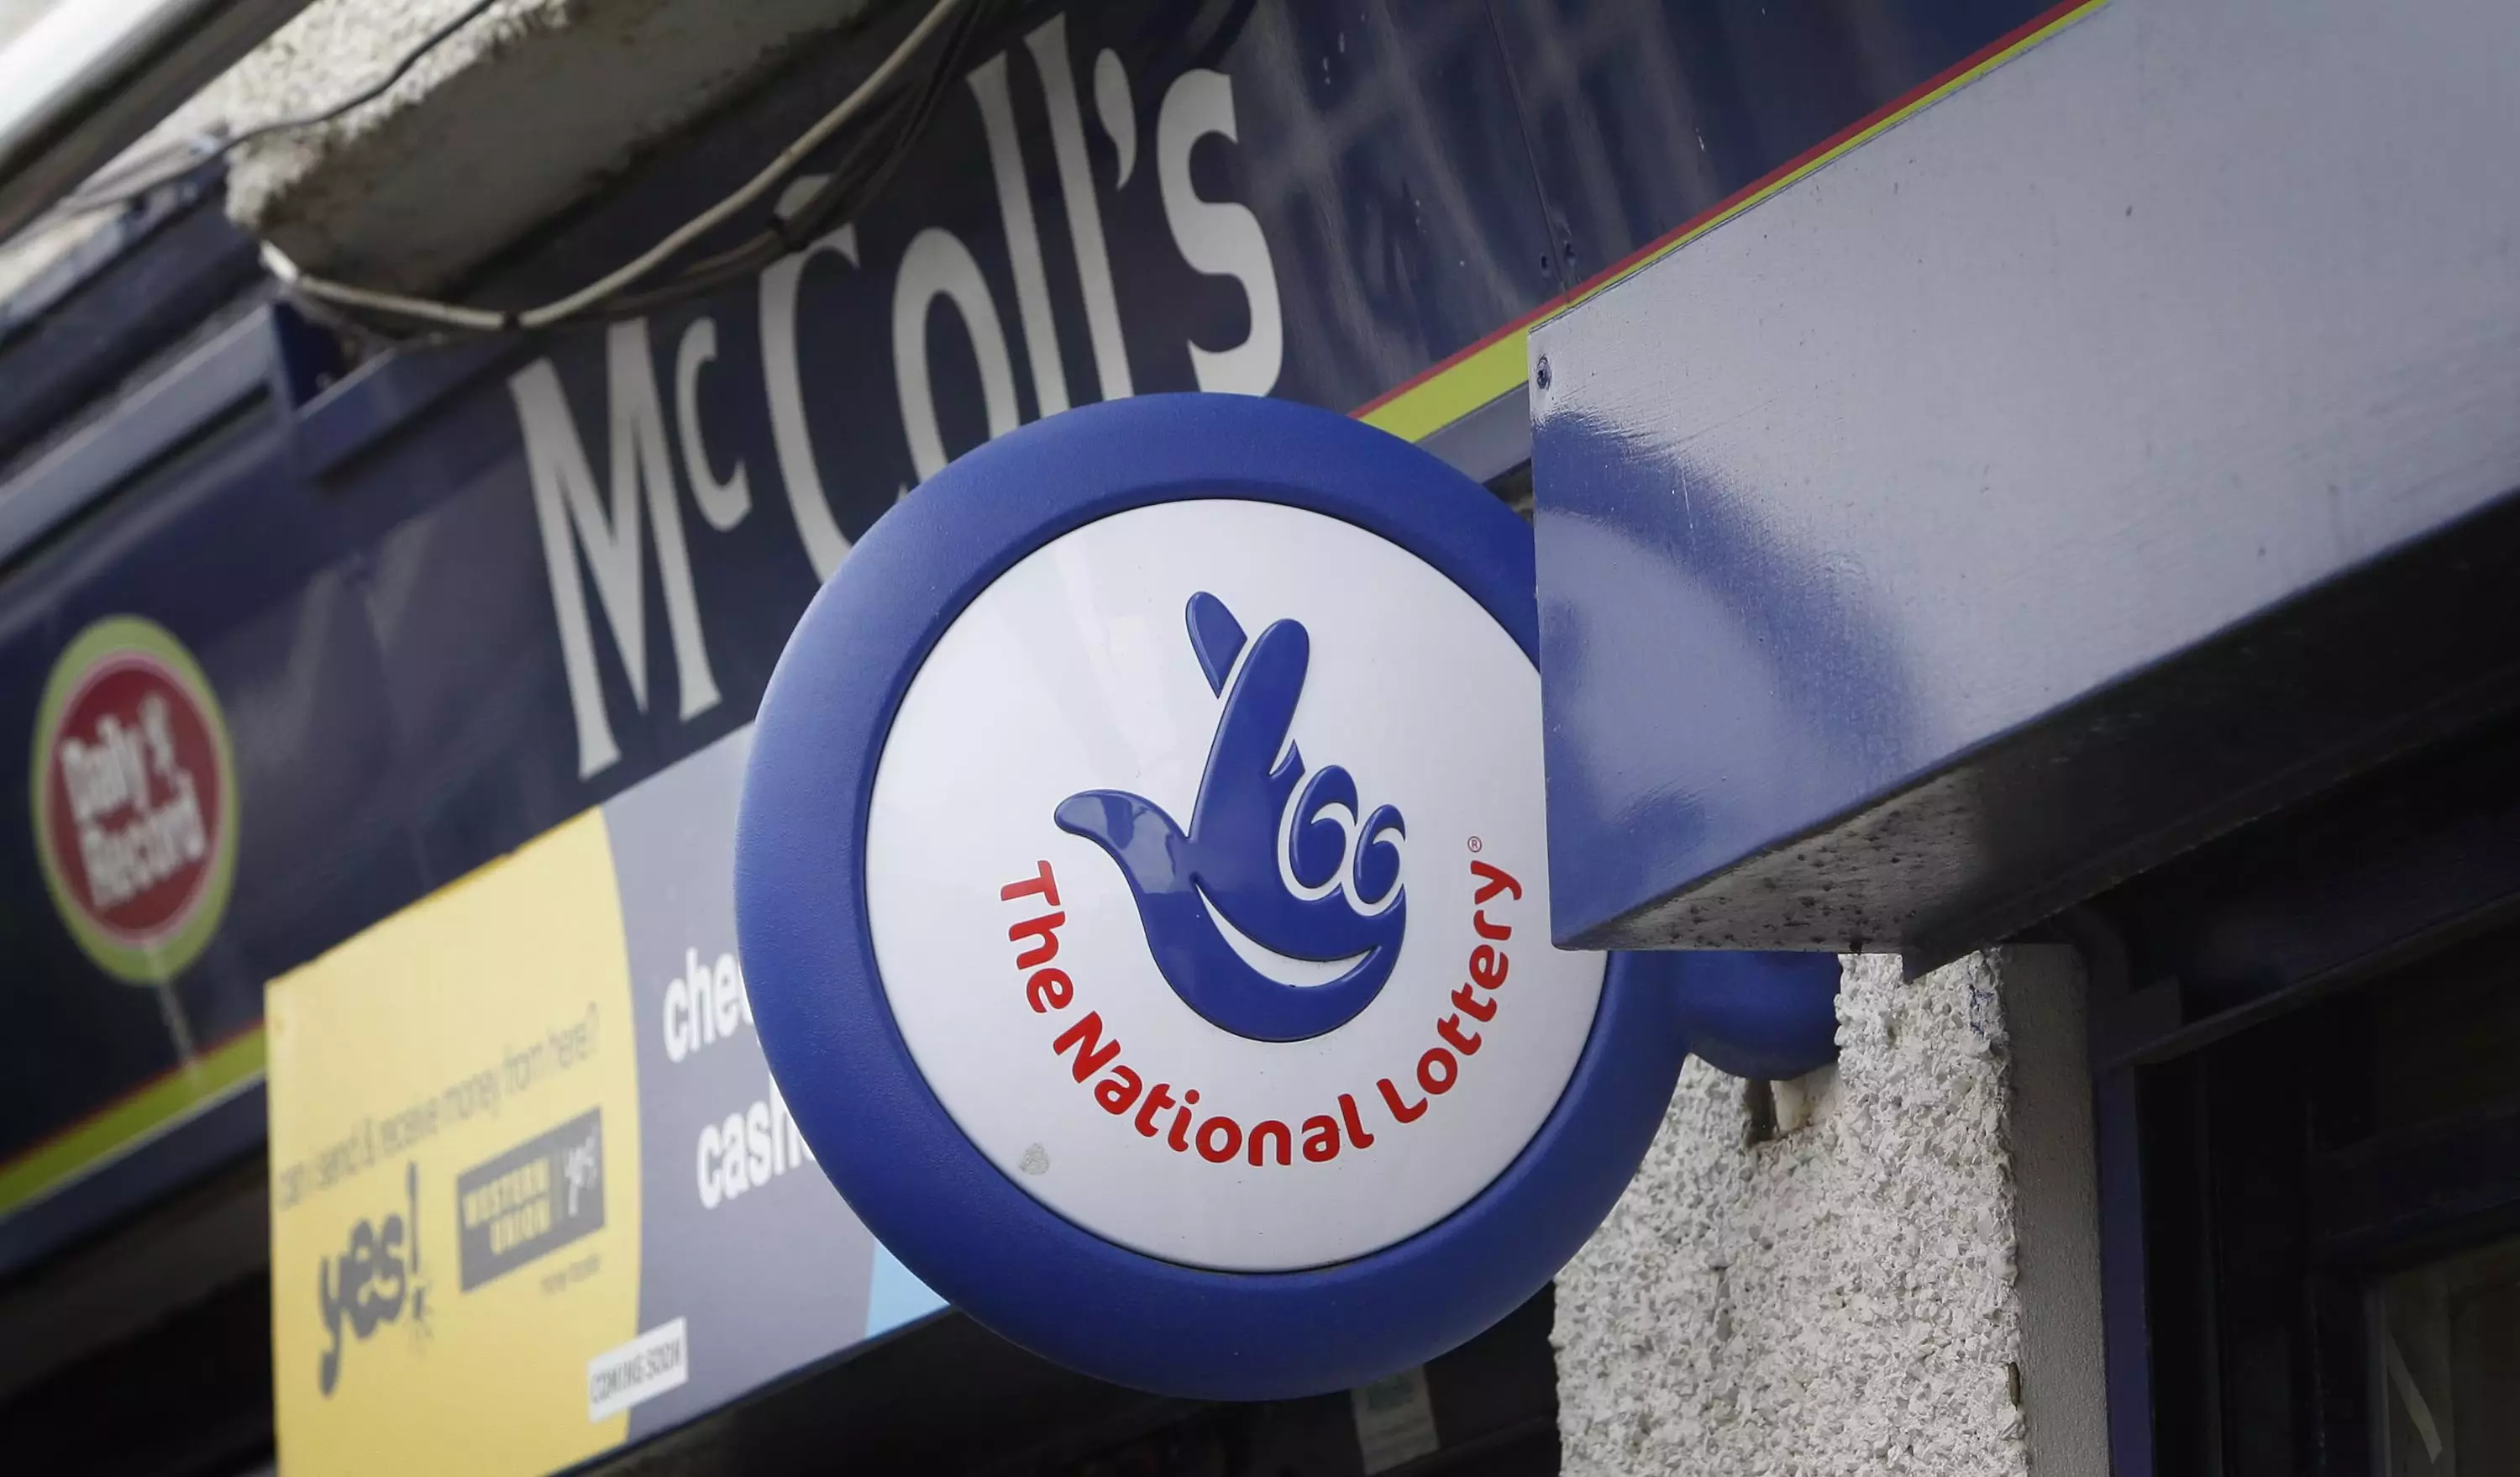 The National Lottery won't confirm whether the claim has been validated.